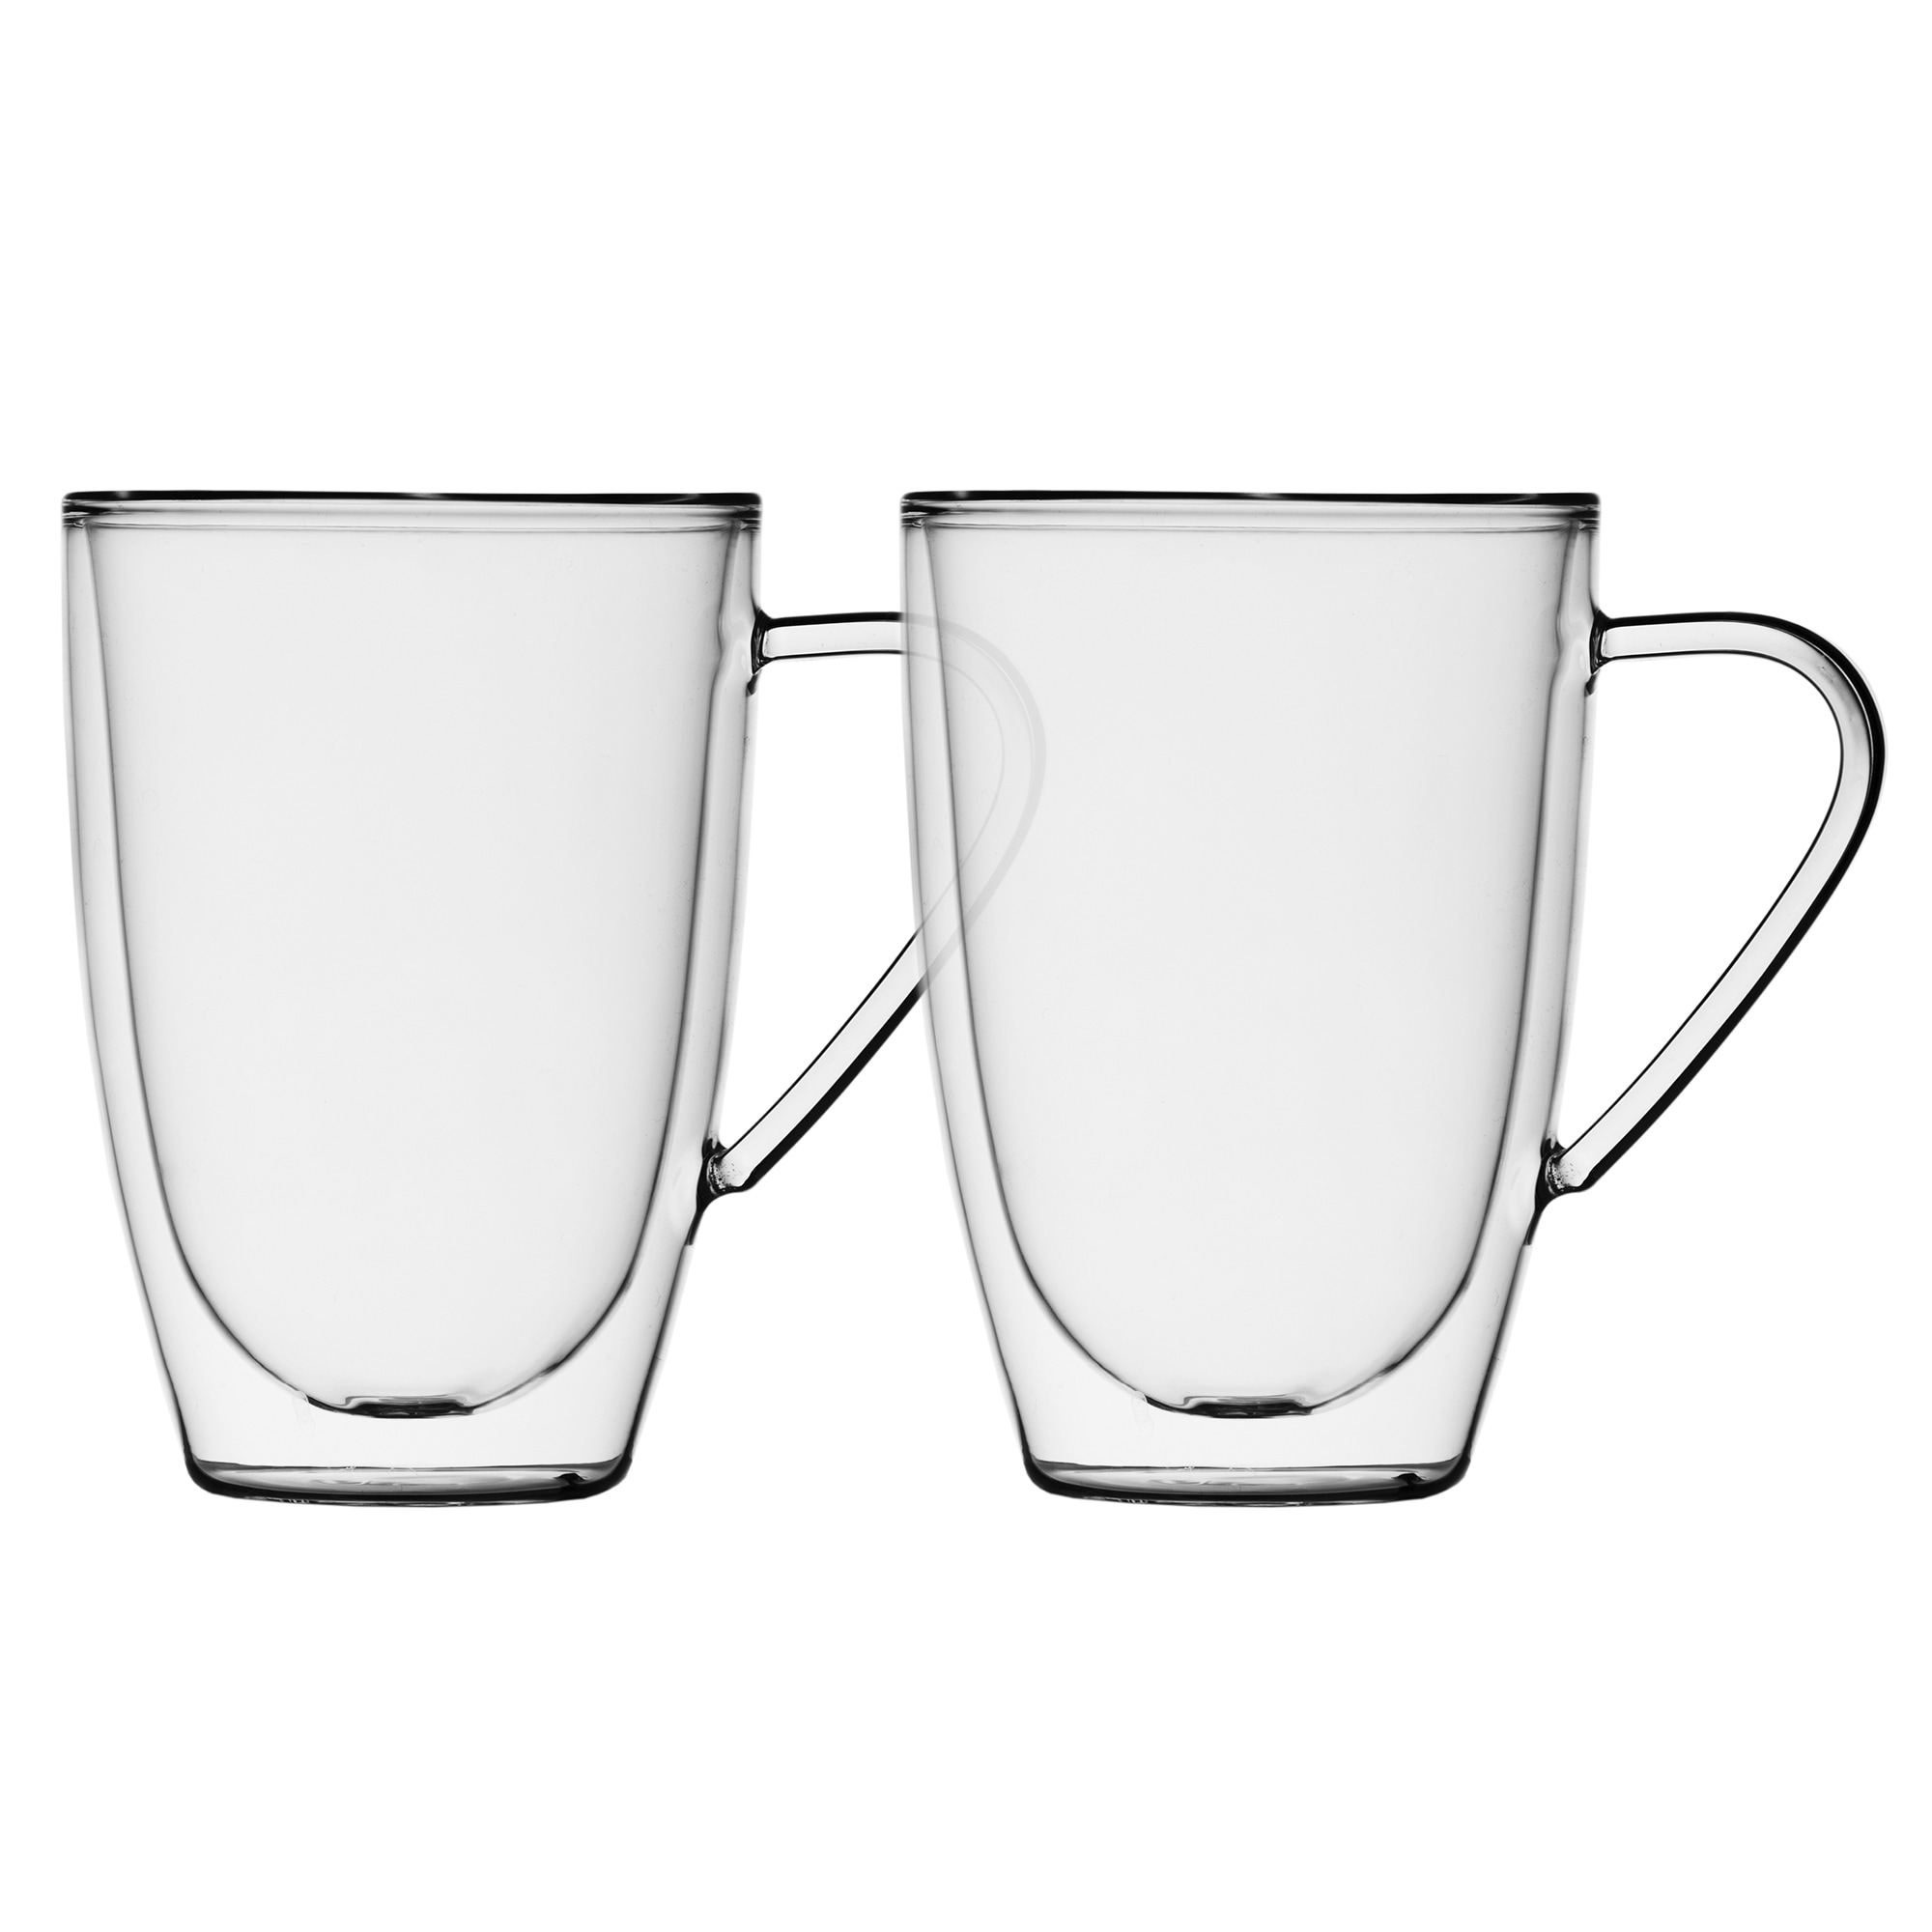 https://ak1.ostkcdn.com/images/products/is/images/direct/24cbac2118245a30bf58636557d5ed7e35eba0ff/Insulated-Double-Wall-Mug-Cup-Glass-Set-of-4-Mugs-Cups-Thermal%2C435ml.jpg